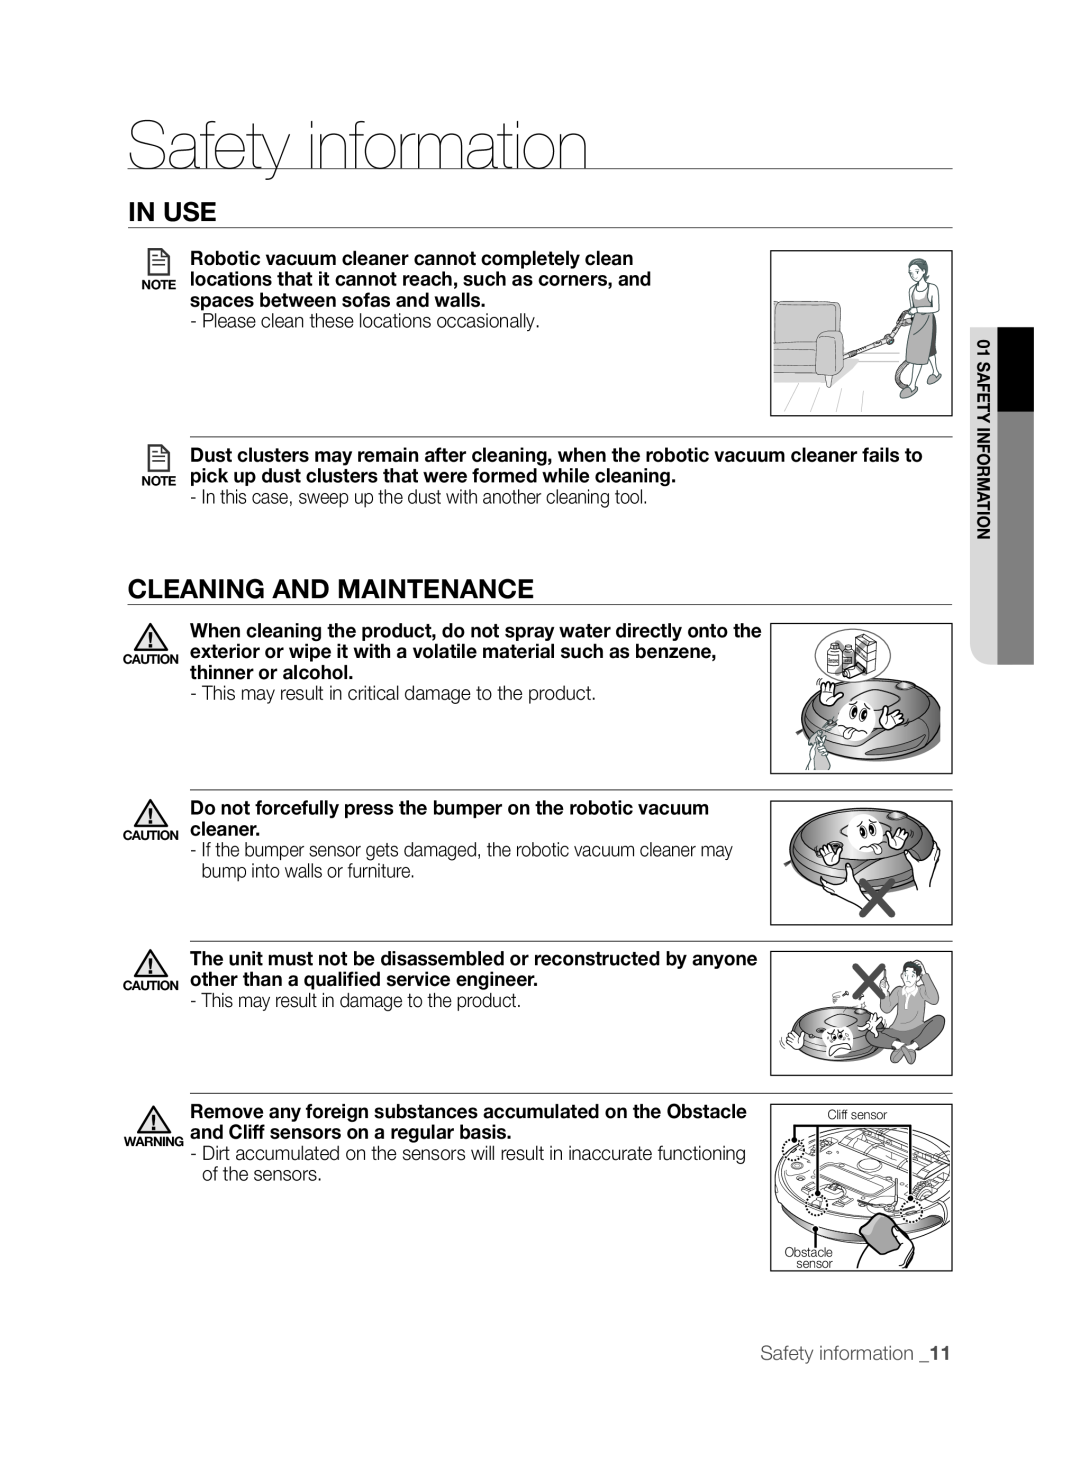 Samsung DJ68-00518A, VCR8830T1R, SR8830 user manual Cleaning and Maintenance, In use, Safety information _11 